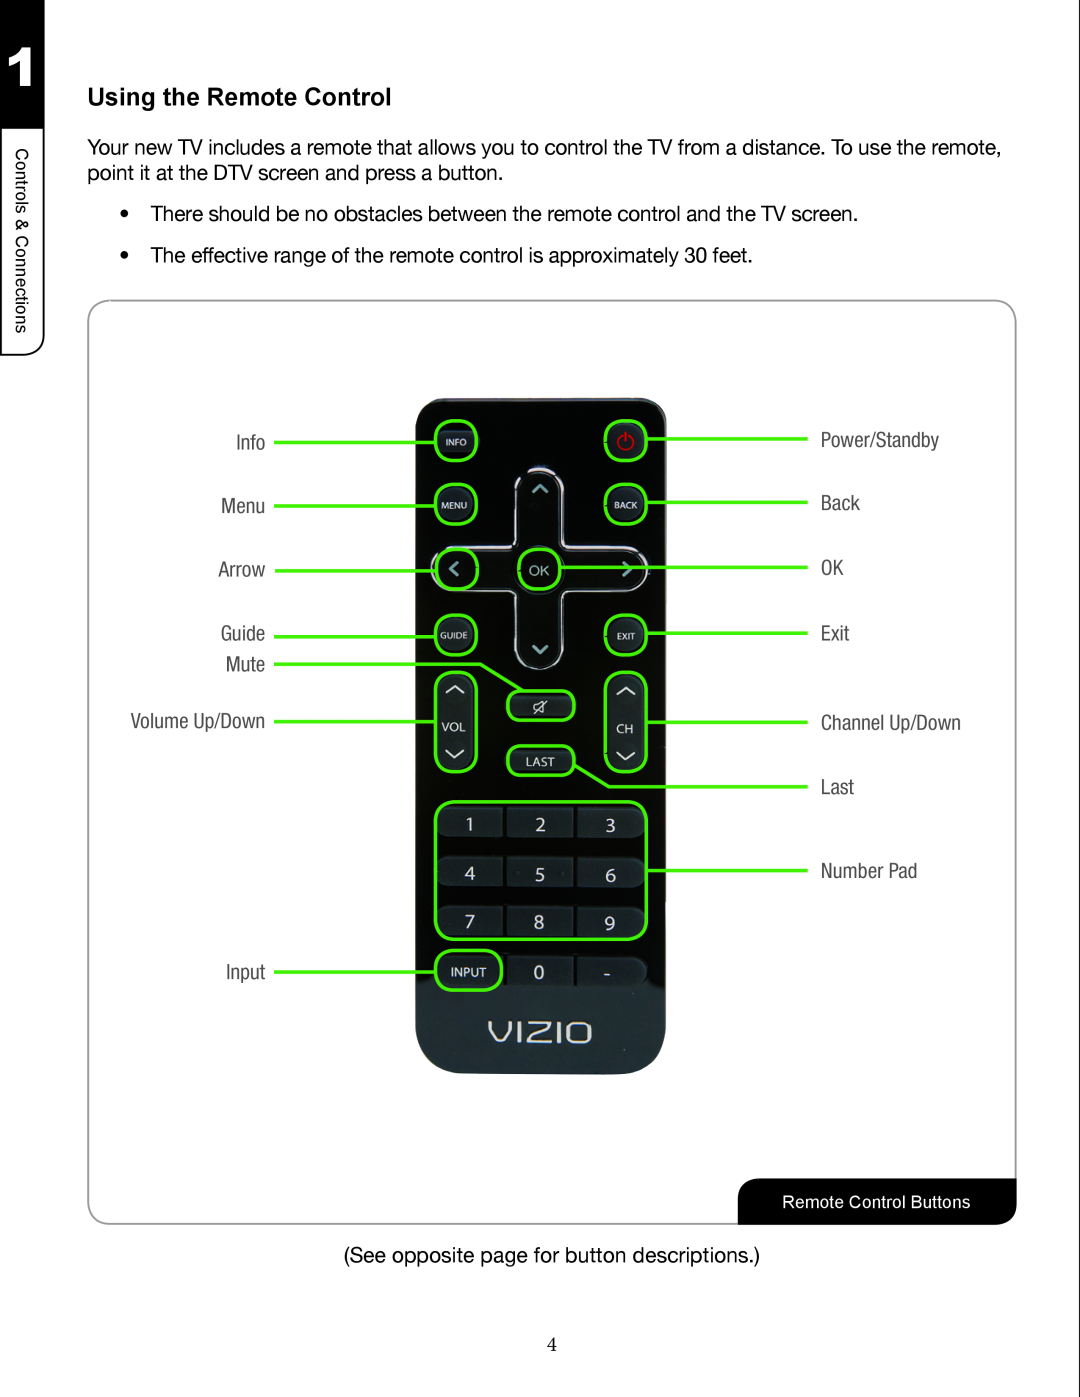 Zanussi VMB070 manual Using the Remote Control, Info, Back, Arrow OK, Guide, Exit, Mute, Last, Number Pad, Input 